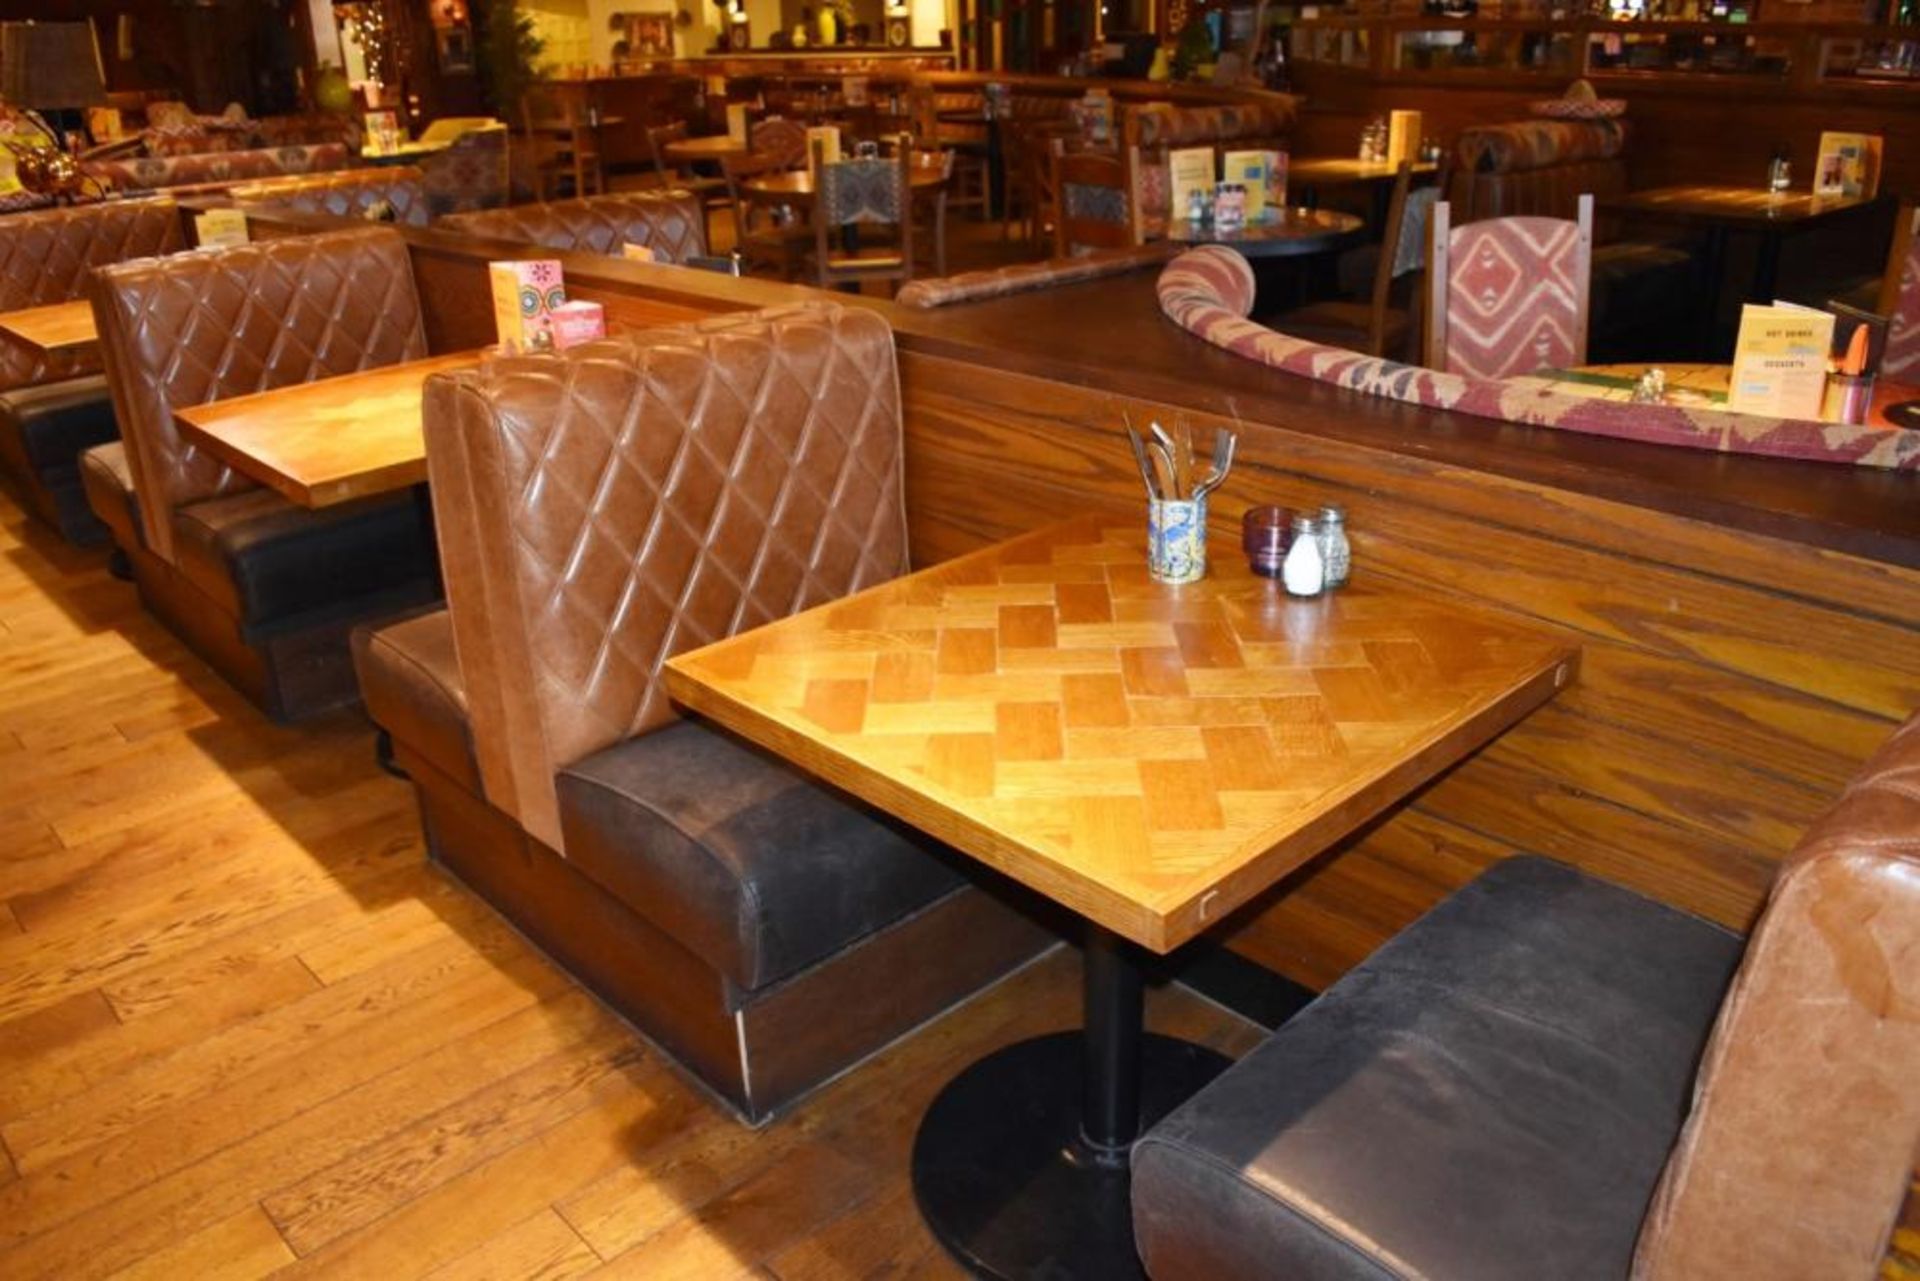 5 x Parquet Design Restaurant Dining Tables With Cast Iron Bases - Small Size - CL461 - Location: Lo - Image 6 of 6